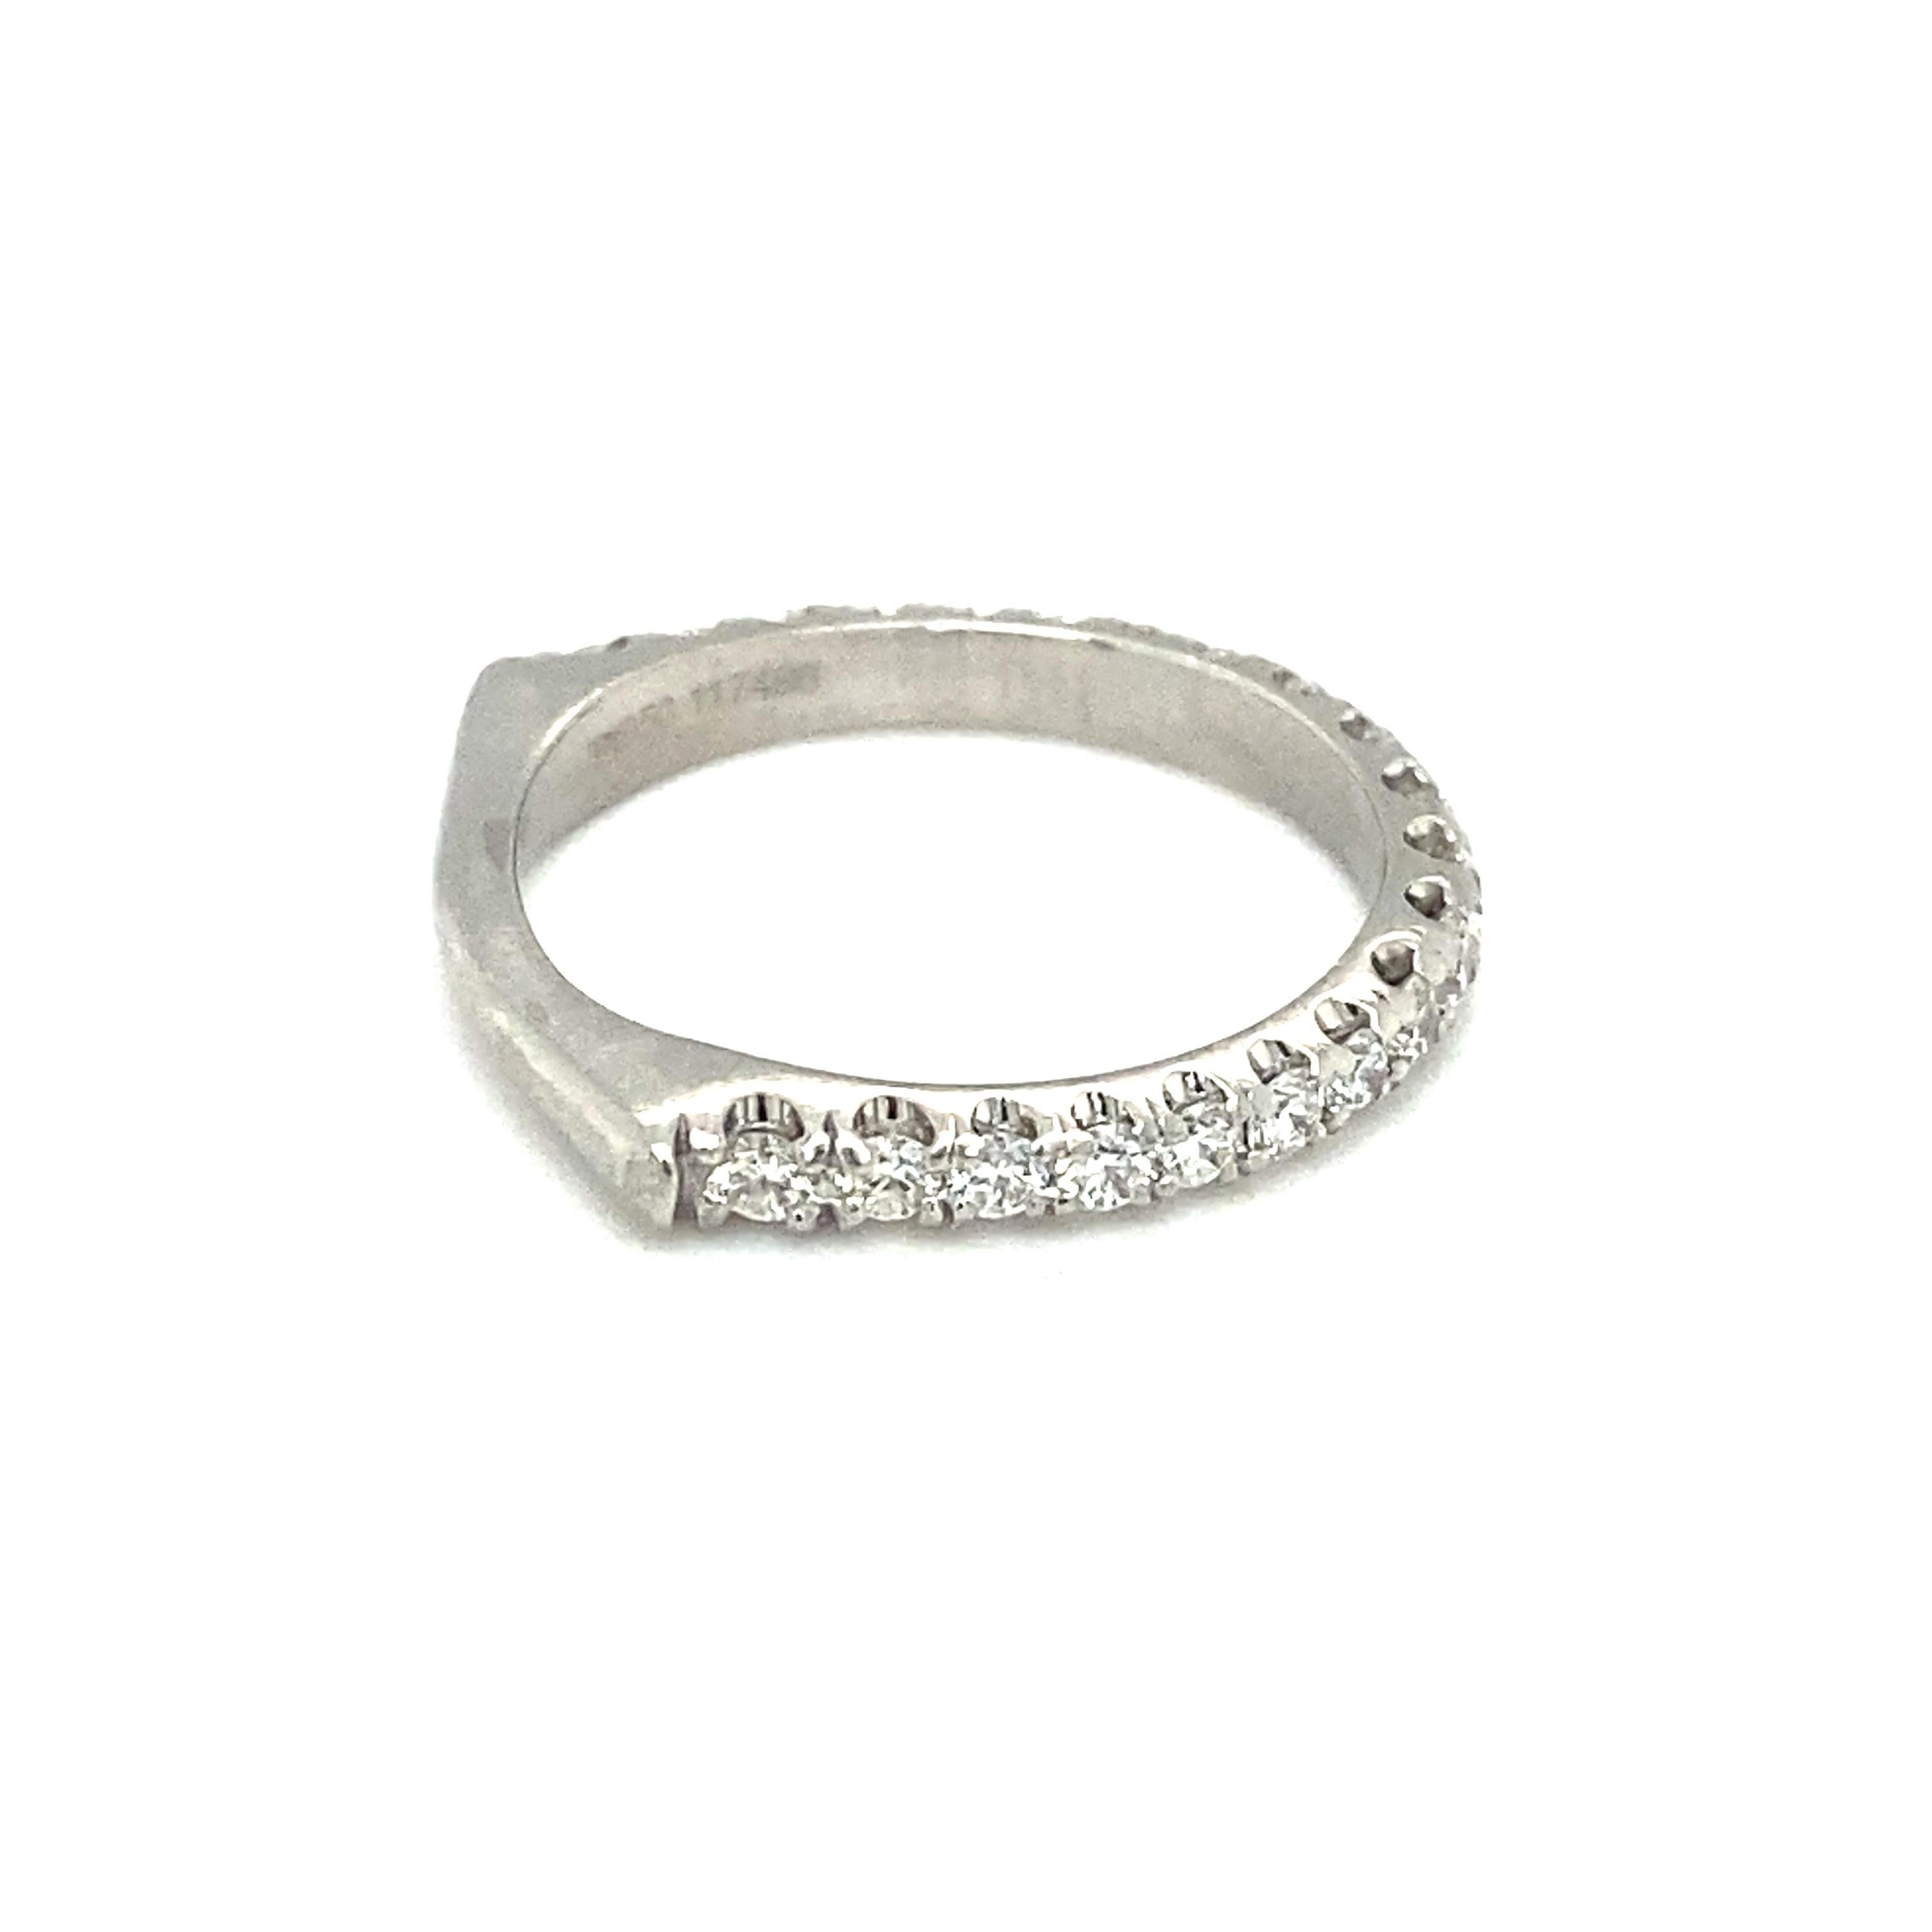 Item Details: This band by Michael M. features over half a carat of diamond with a Euro shank design. Both unique and timeless! 

Circa: 2000s
Metal Type: Platinum
Weight: 4.7 grams
Size: US 7.75, resizable 1-2 sizes 

Diamond Details:

Carat: 0.80